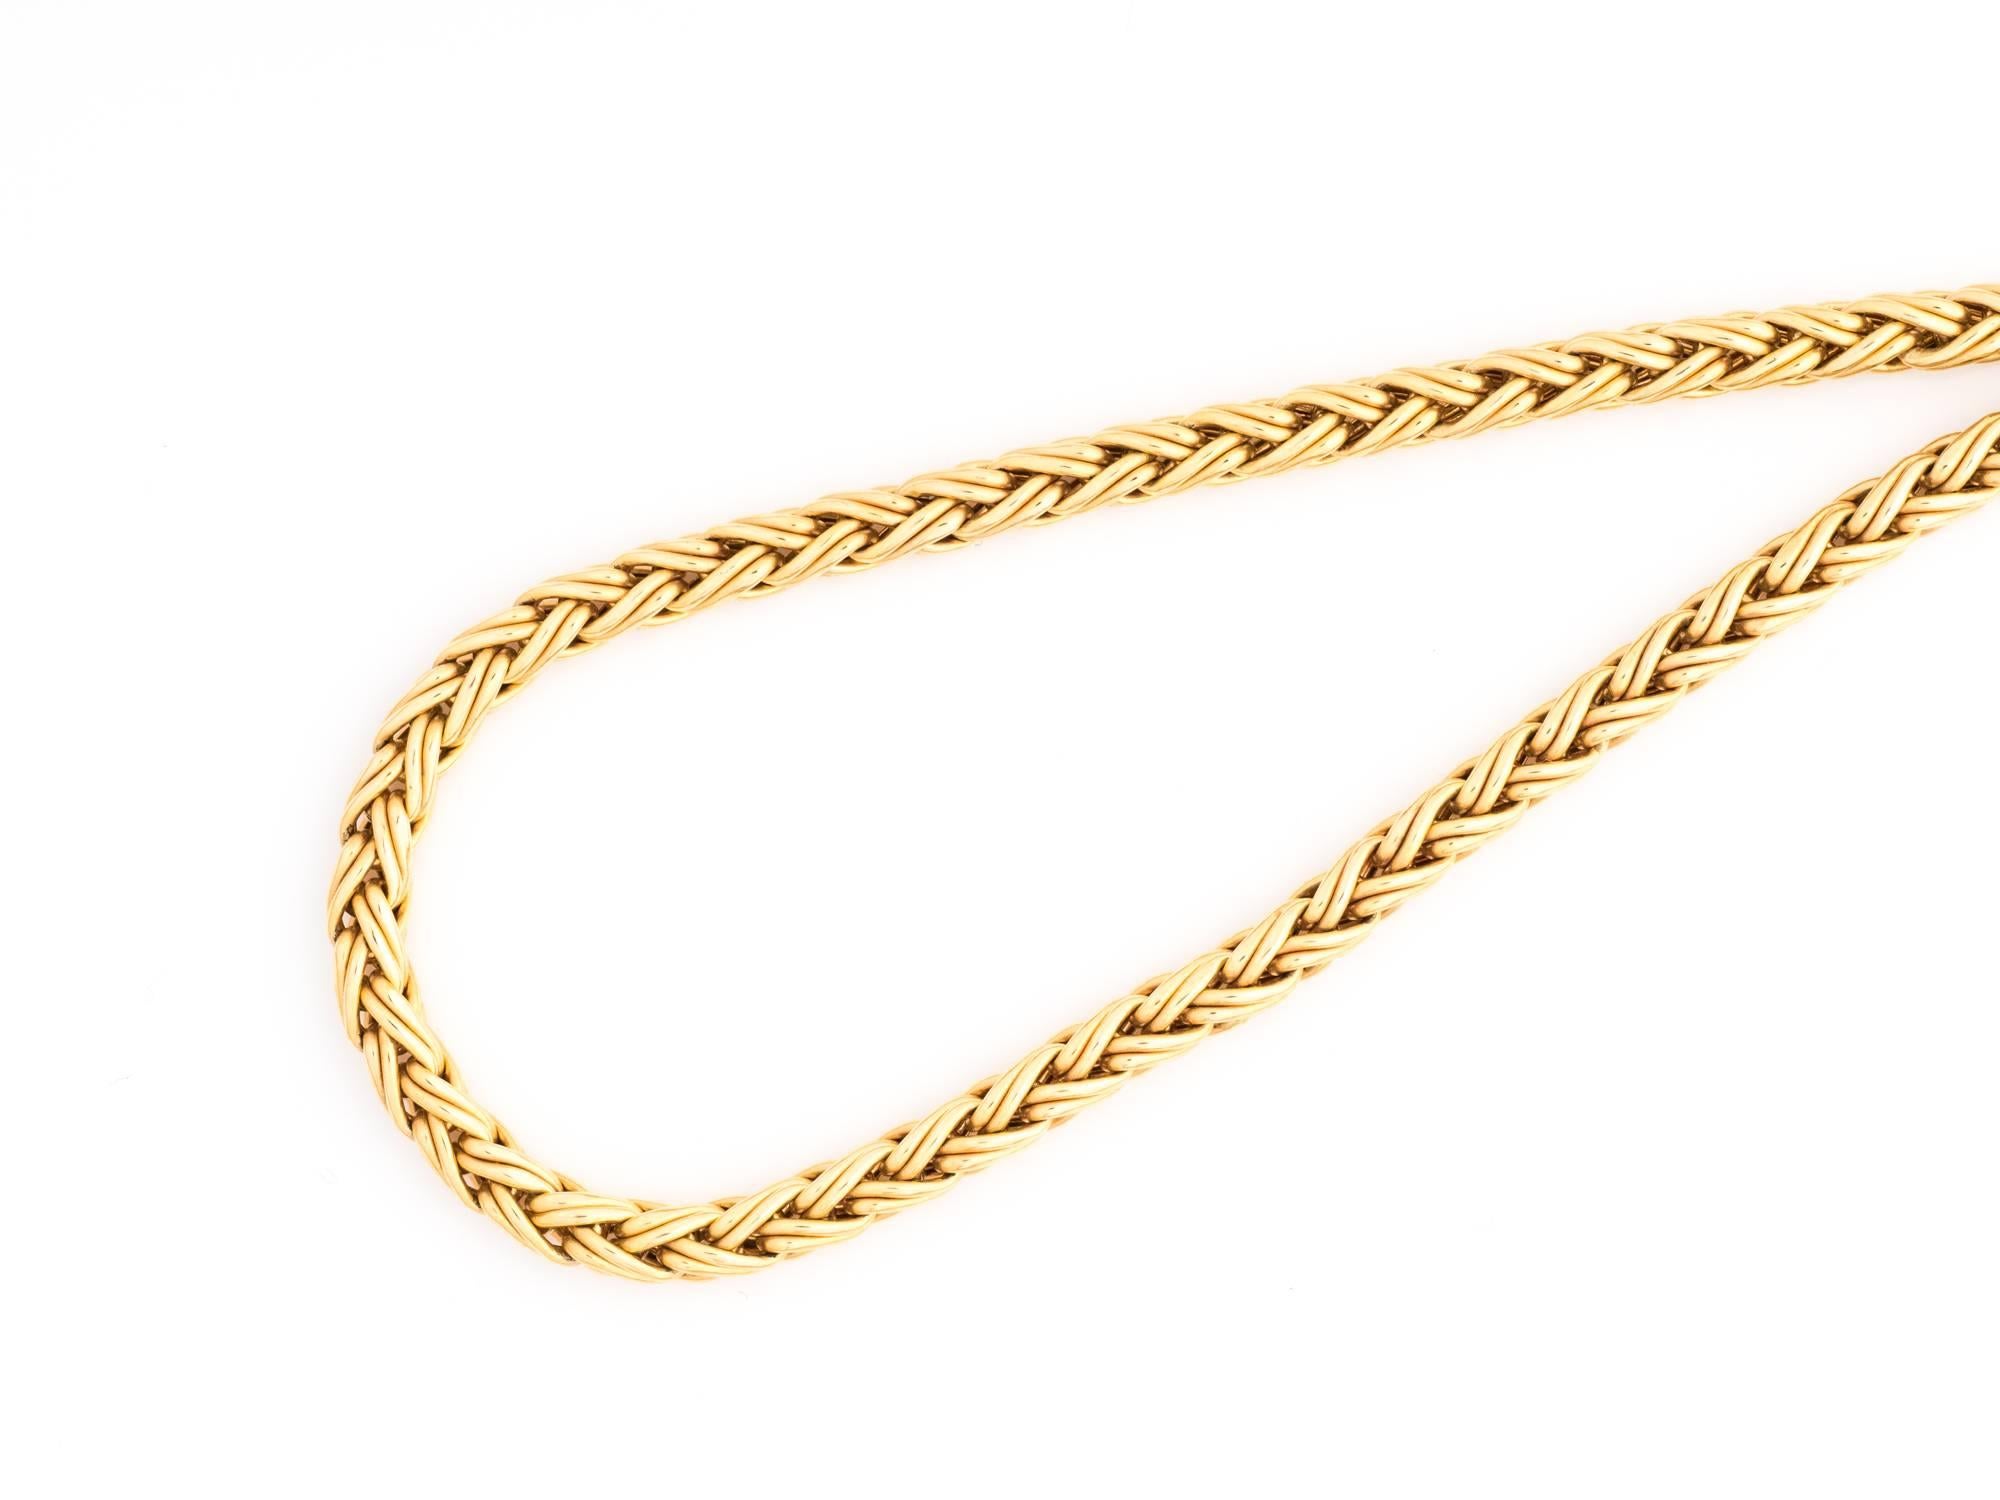 1960s Tiffany & Co. 14 Karat Yellow Gold Wheat Braided Chain Necklace

16 Inches long, 4.2 mm thick Wheat Braided Chain in rich 14K Yellow Gold
The clasp is hallmarked Tiffany & Co.
This gorgeous necklace comes with the Signature Blue Tiffany & Co.